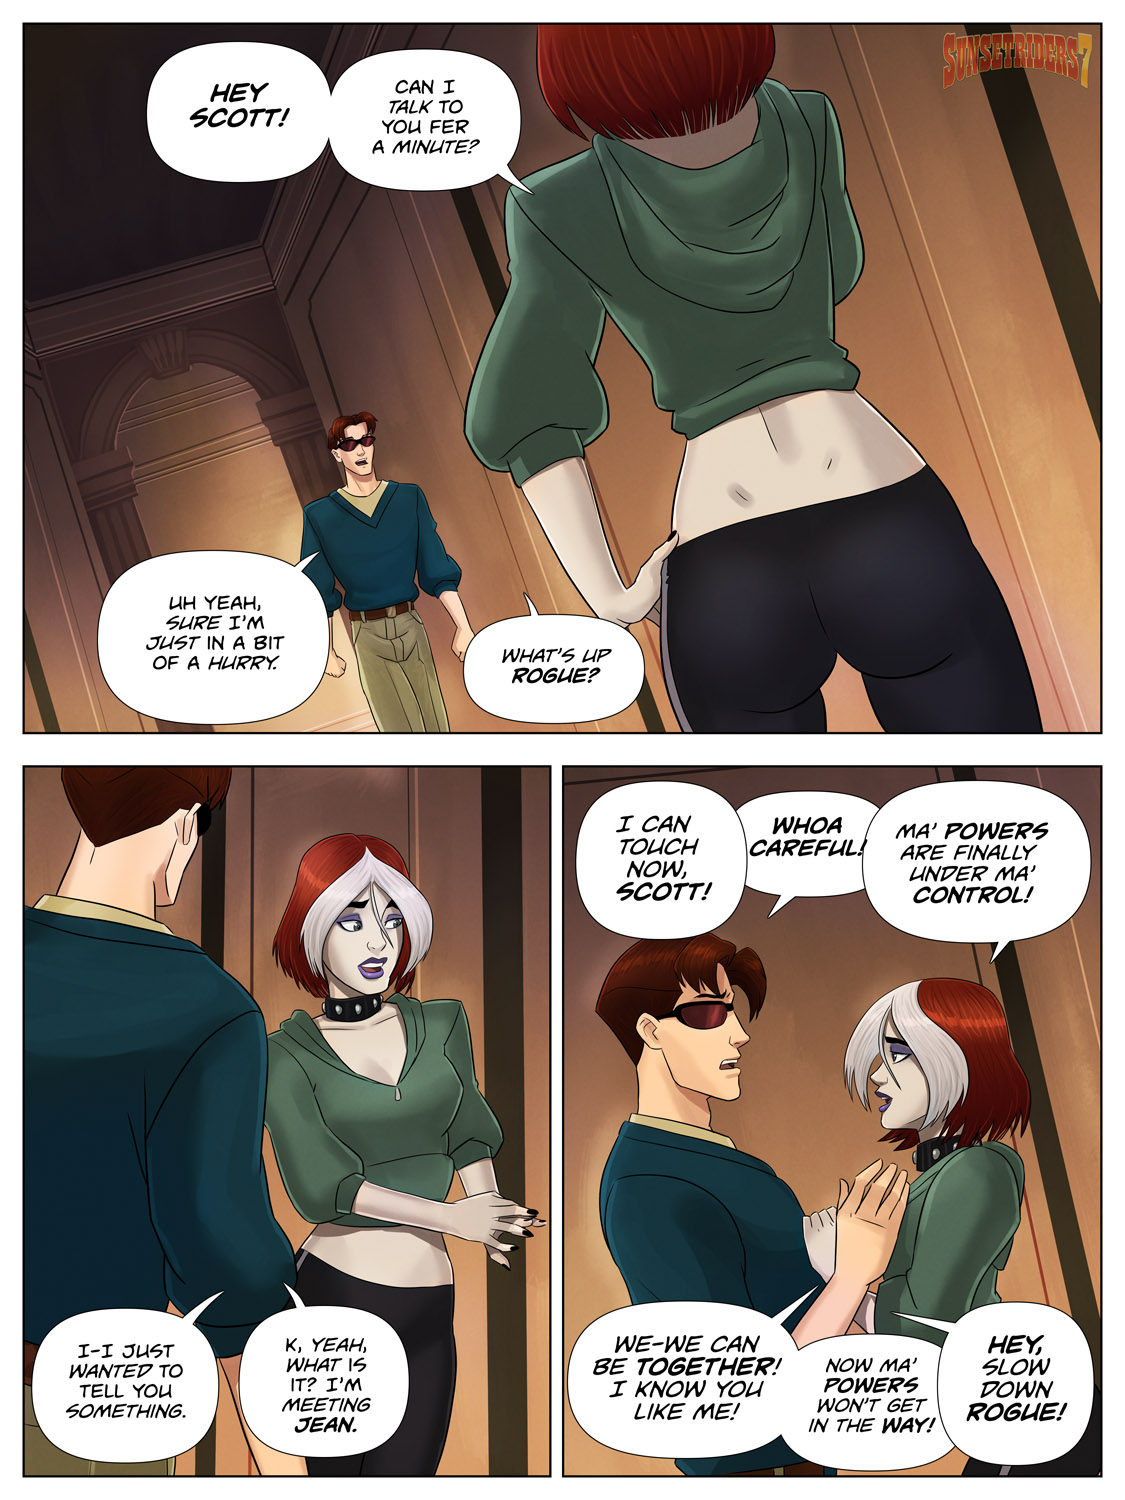 Rogue Lust Powerslave Page 9 By Sunsetriders7 Hentai